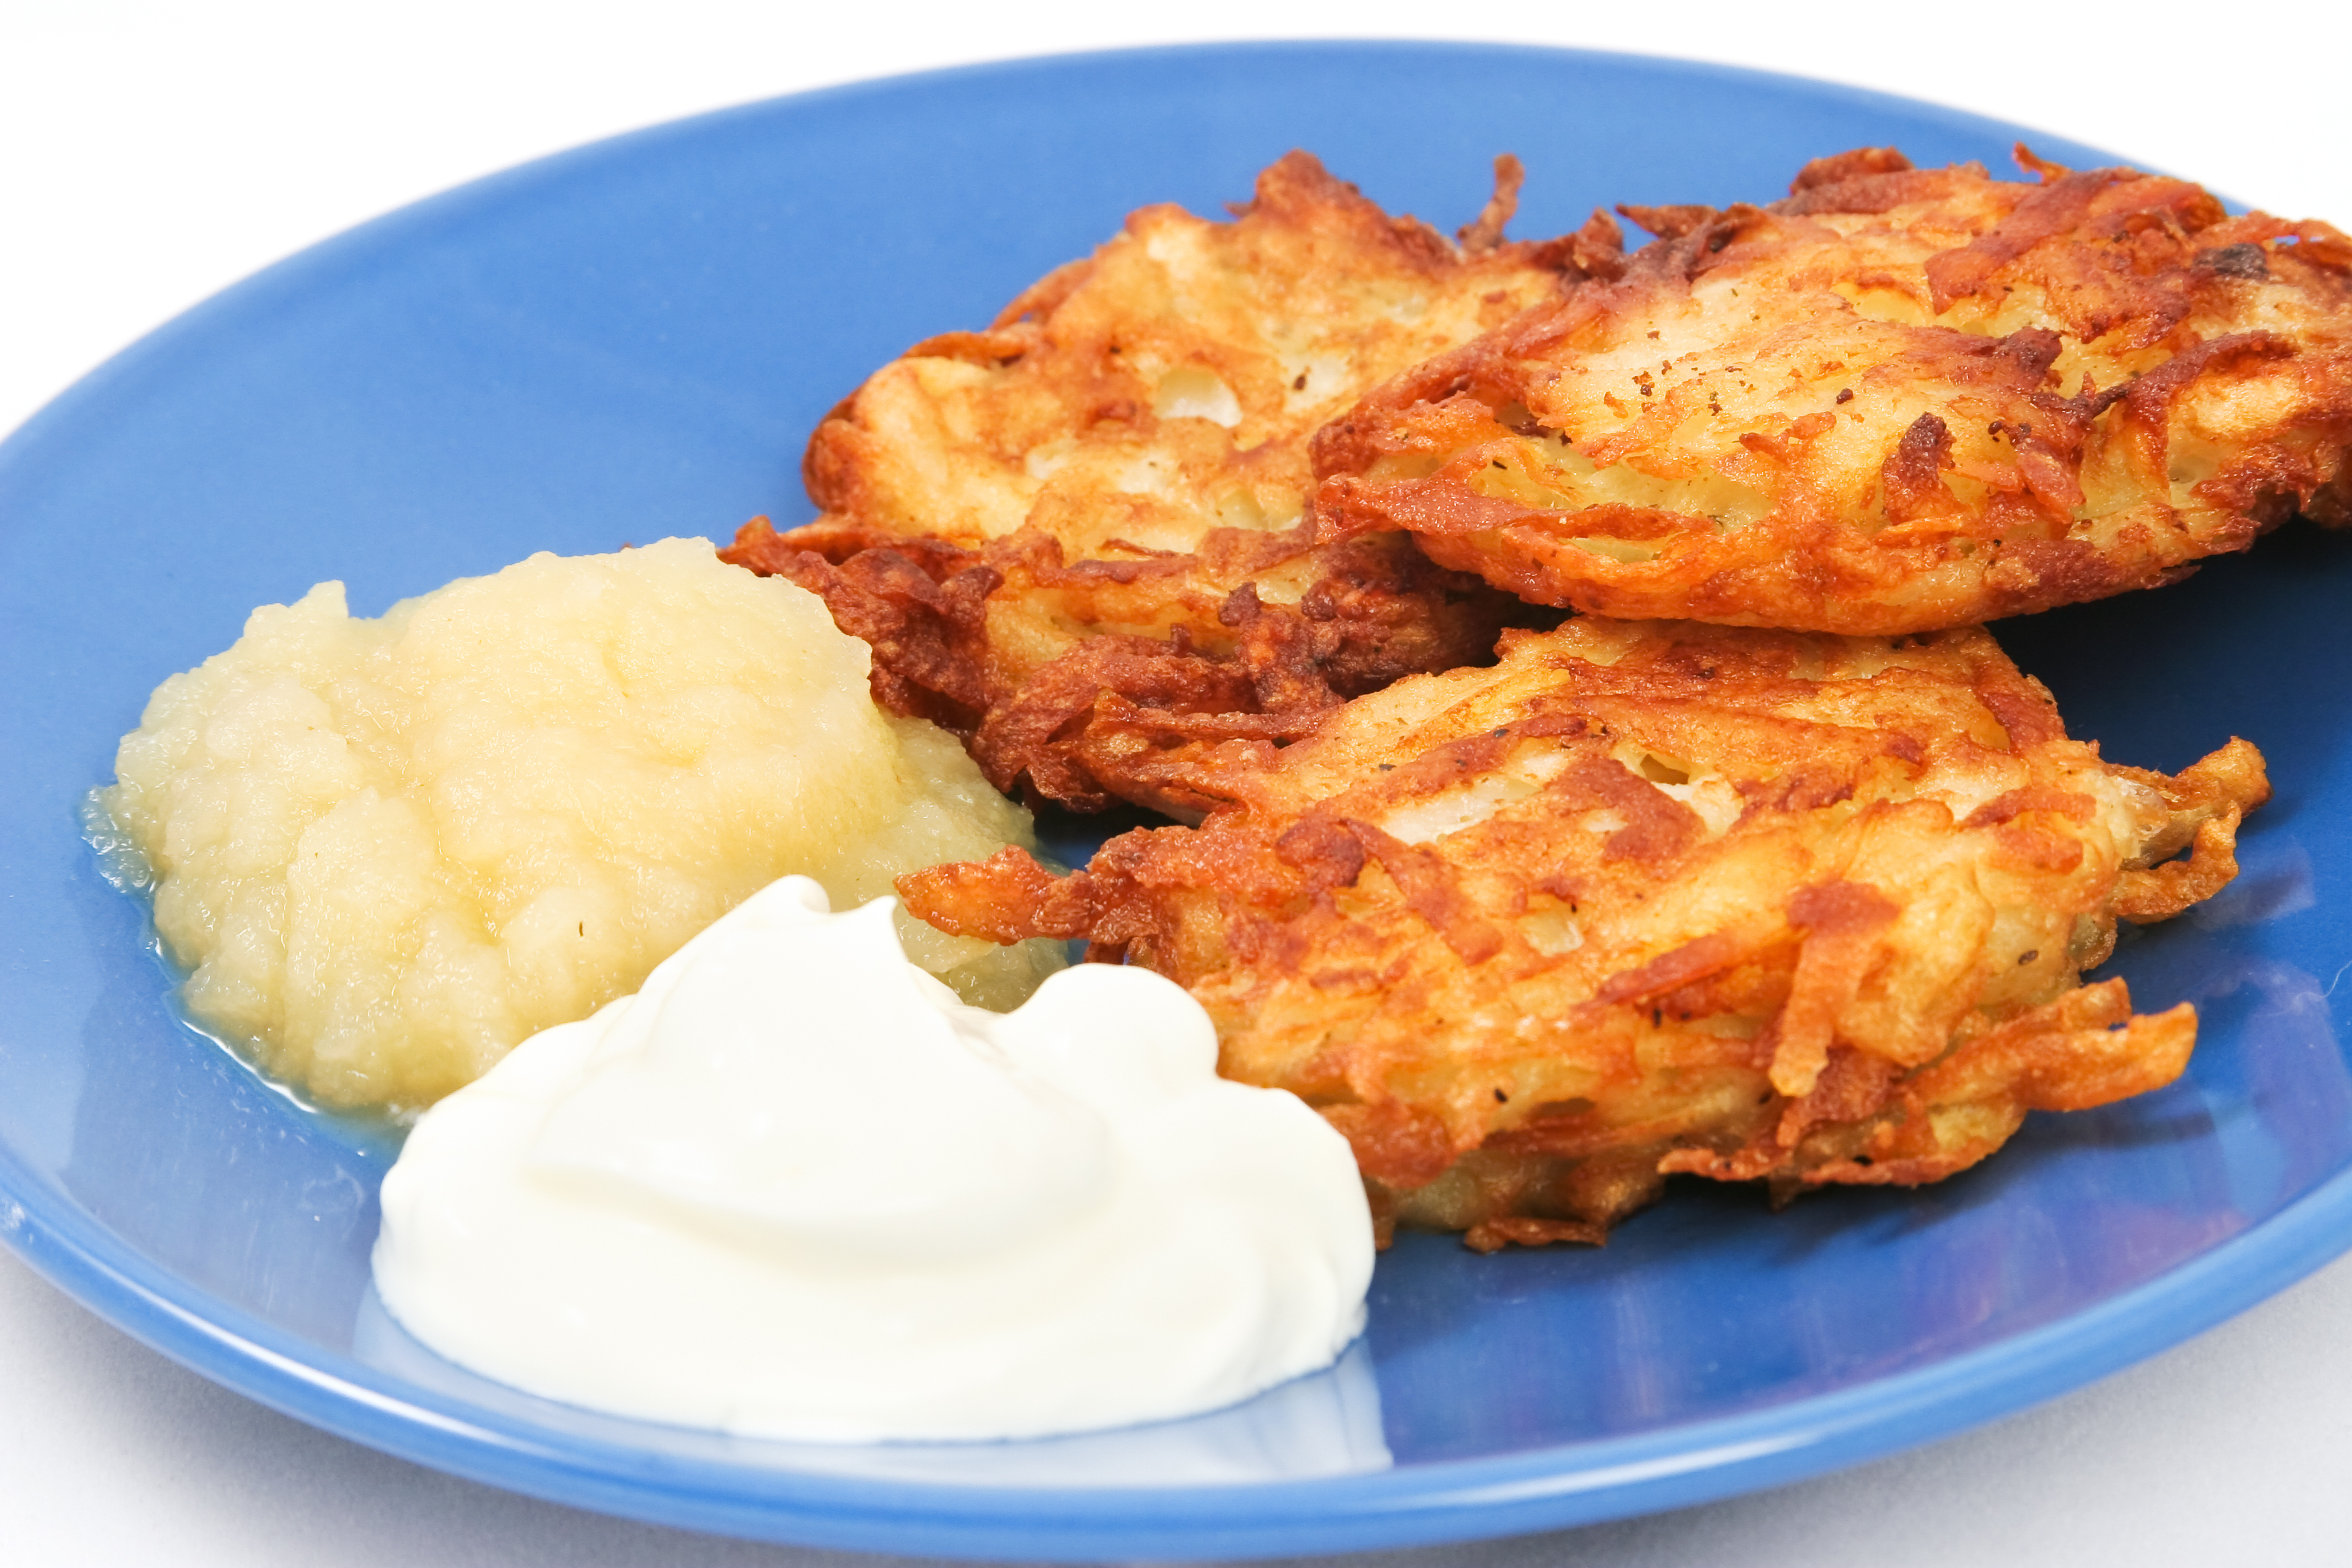 Latkes with apple sauce and sour cream on a blue plate.